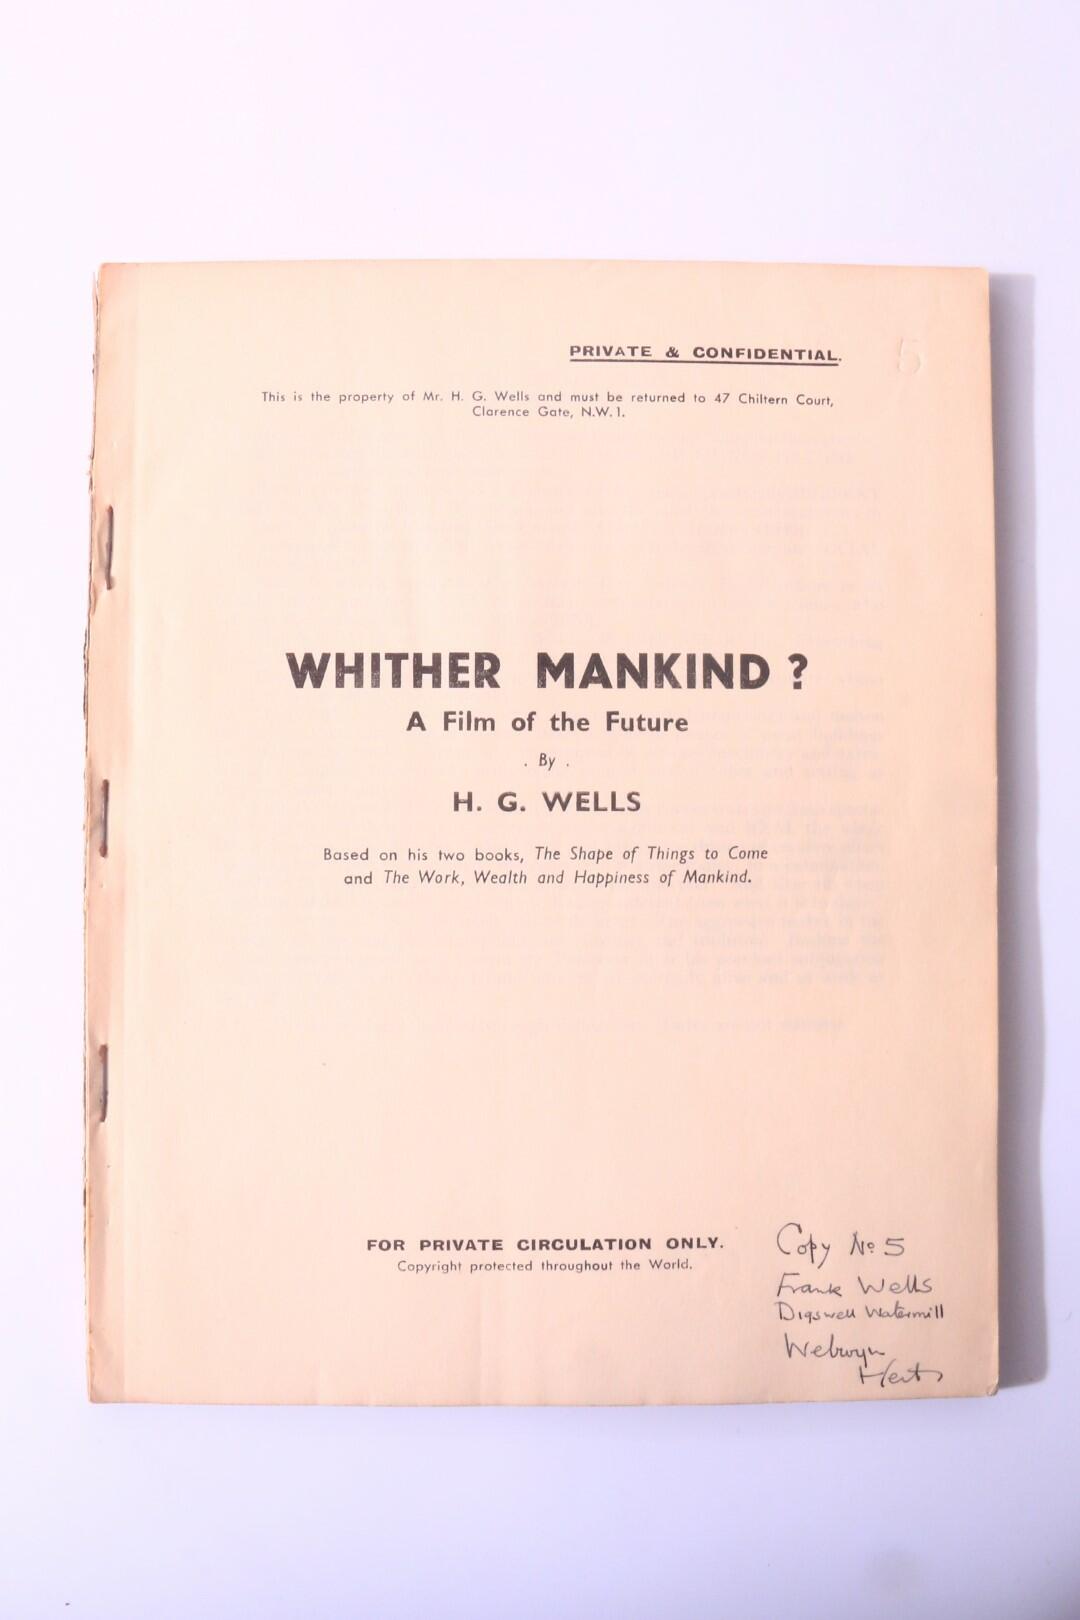 H.G. Wells - Whither Mankind: A Film of the Future - Privately Printed, n.d. [1935], First Edition.